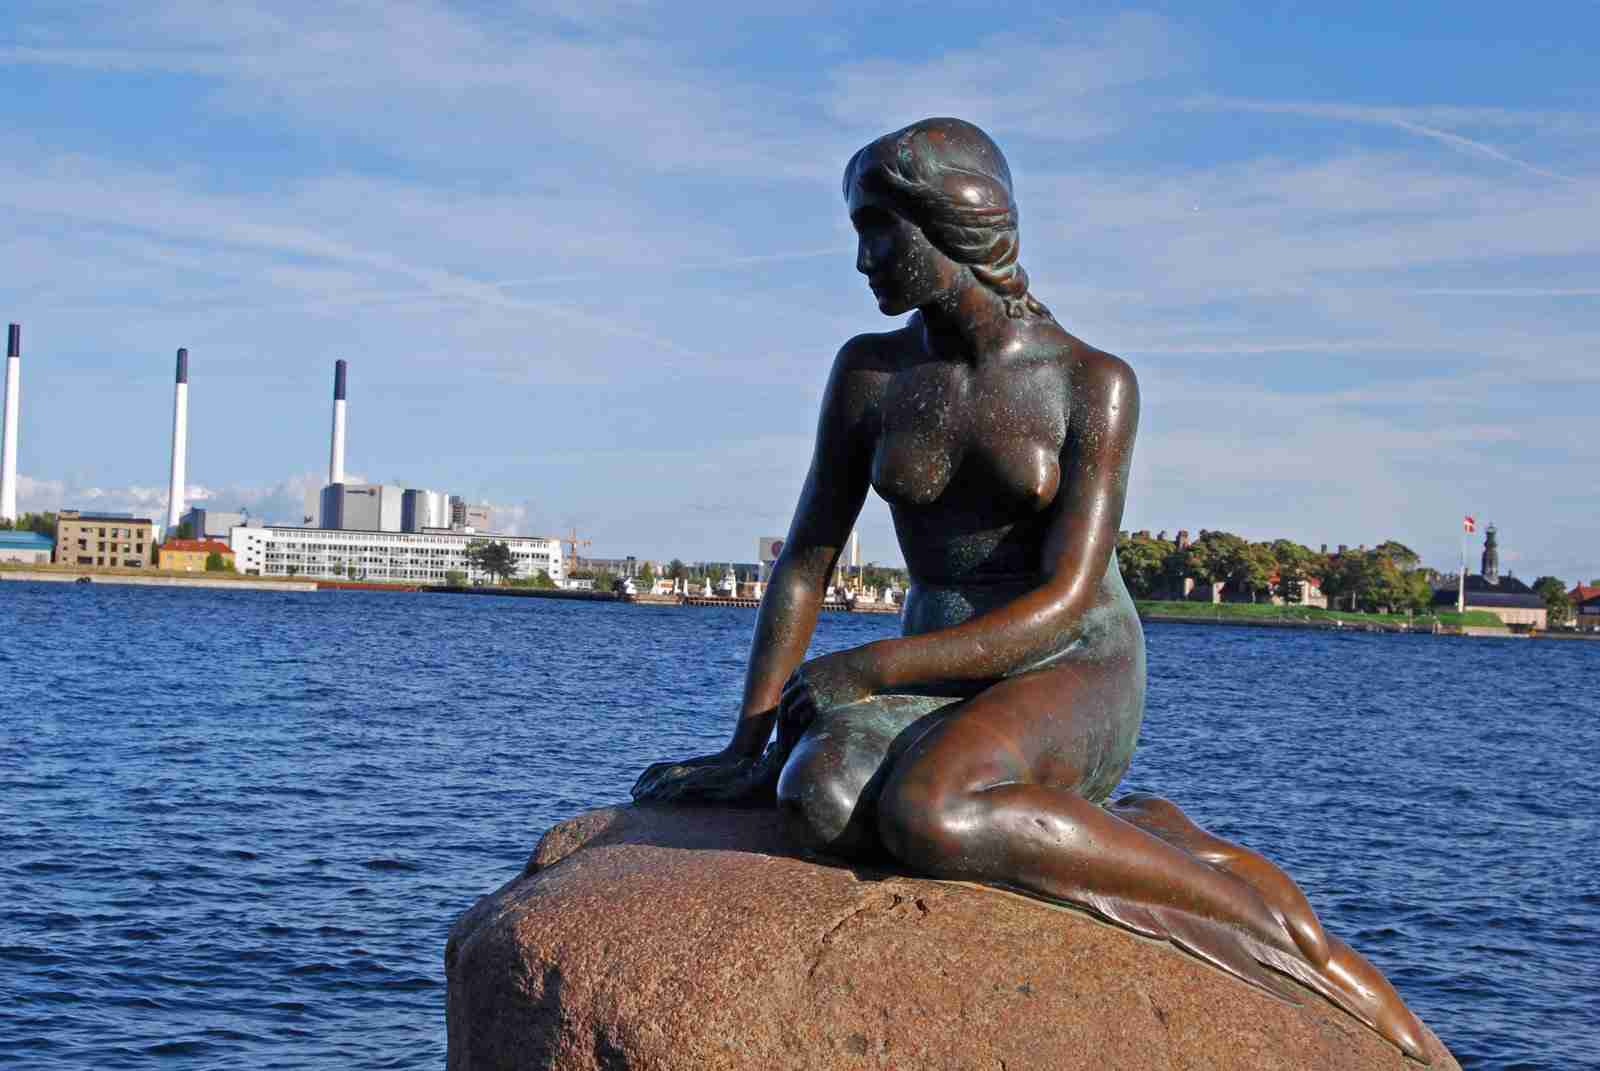 The Little Mermaid gazes at the sea in Copenhagen, the capital of Denmark. The Little Mermaid from Hans Christian Andersen's Fairytales, the author Andersen was born in Denmark. Jan 06, 2013. [Photo/File photo]